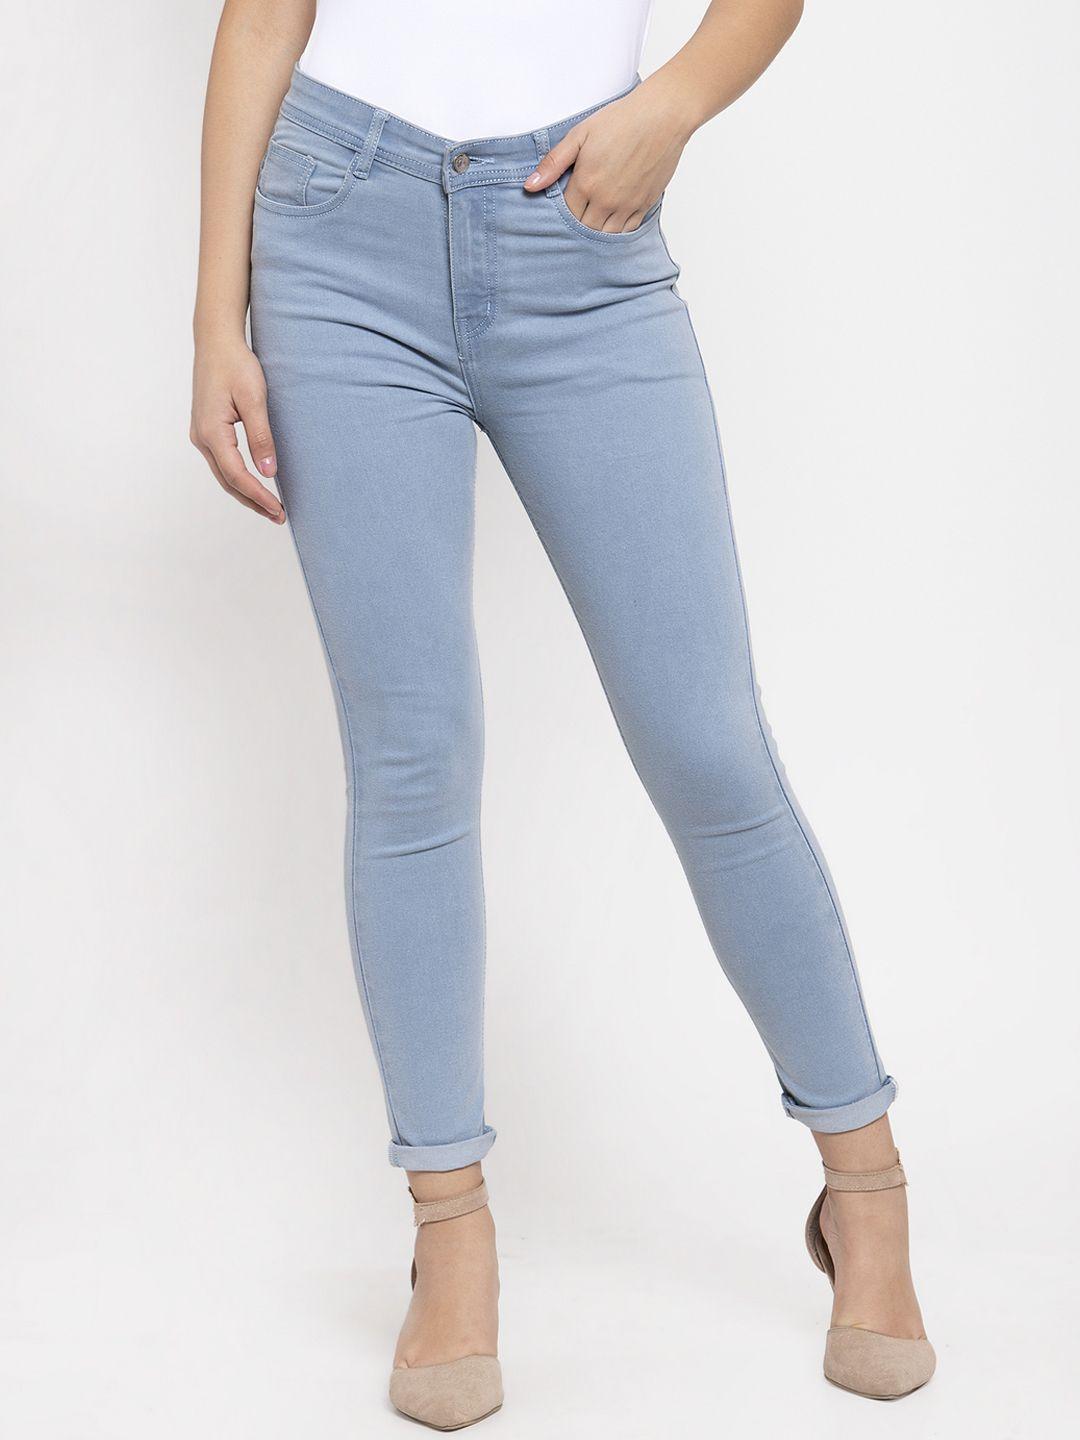 KASSUALLY Women Blue Skinny Fit Mid-Rise Clean Look Stretchable Jeans